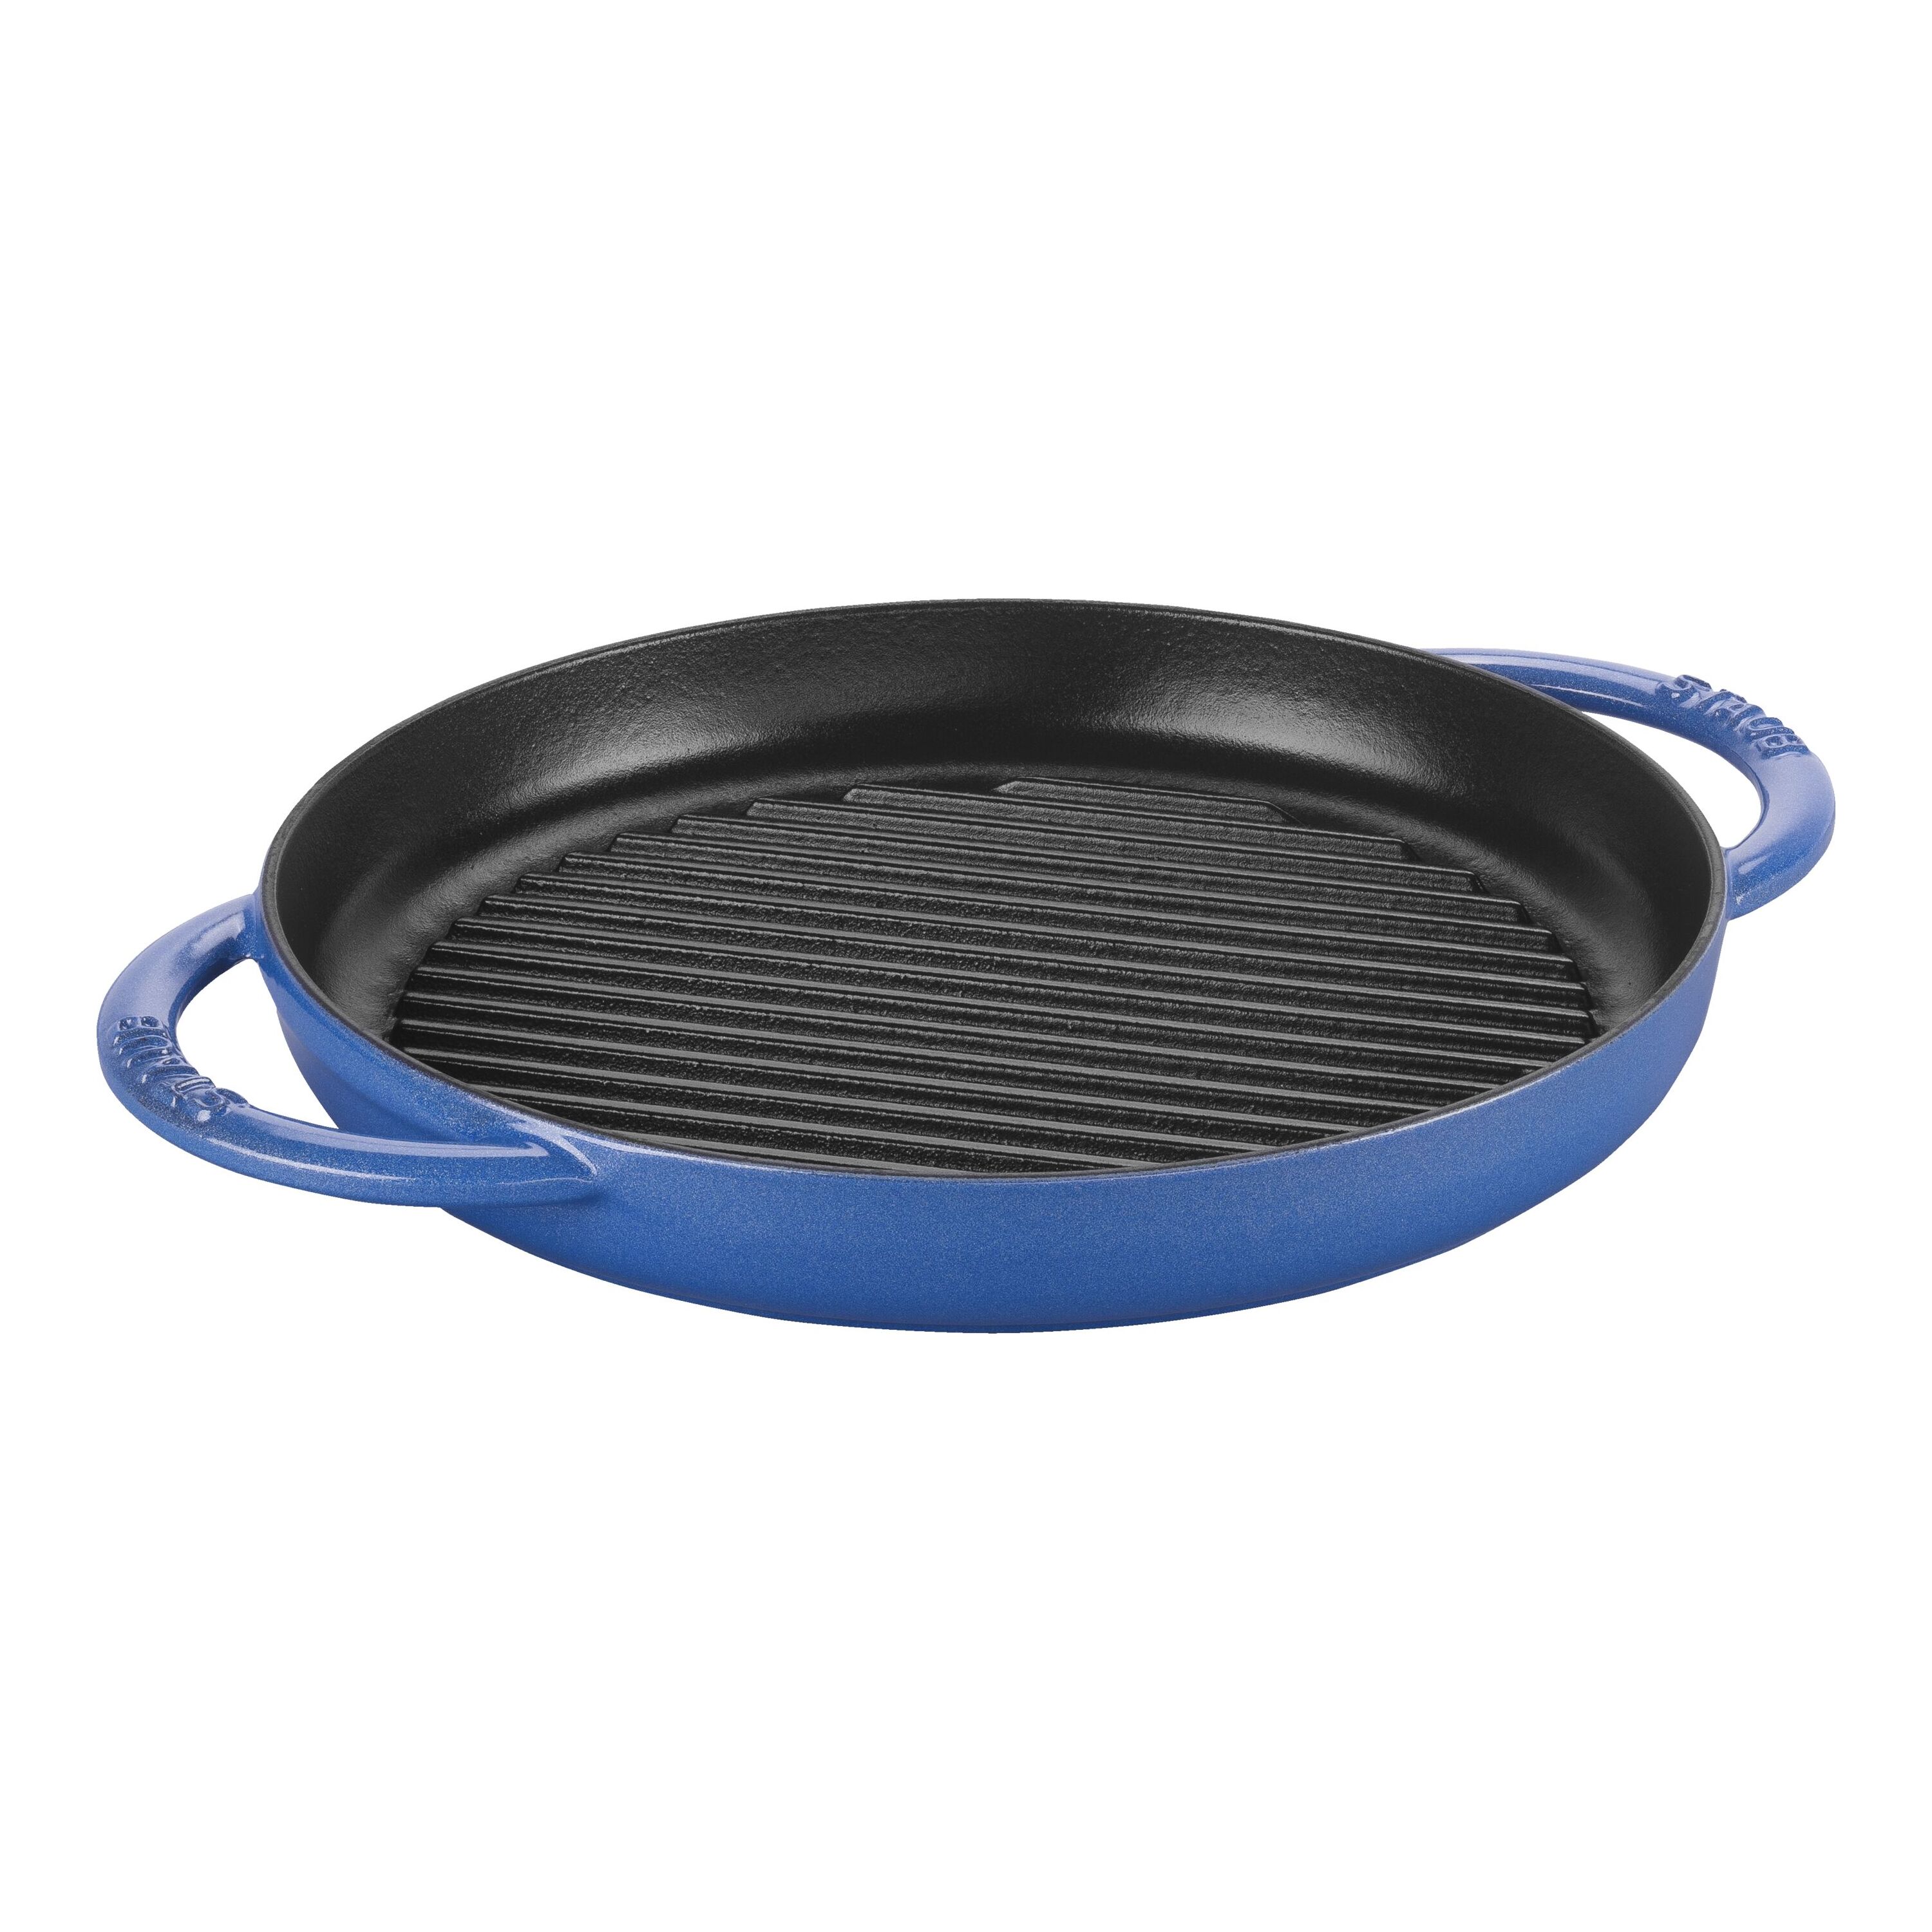 Woll make first high heat non-stick pans, also suitable for the oven - The  Interiors Addict